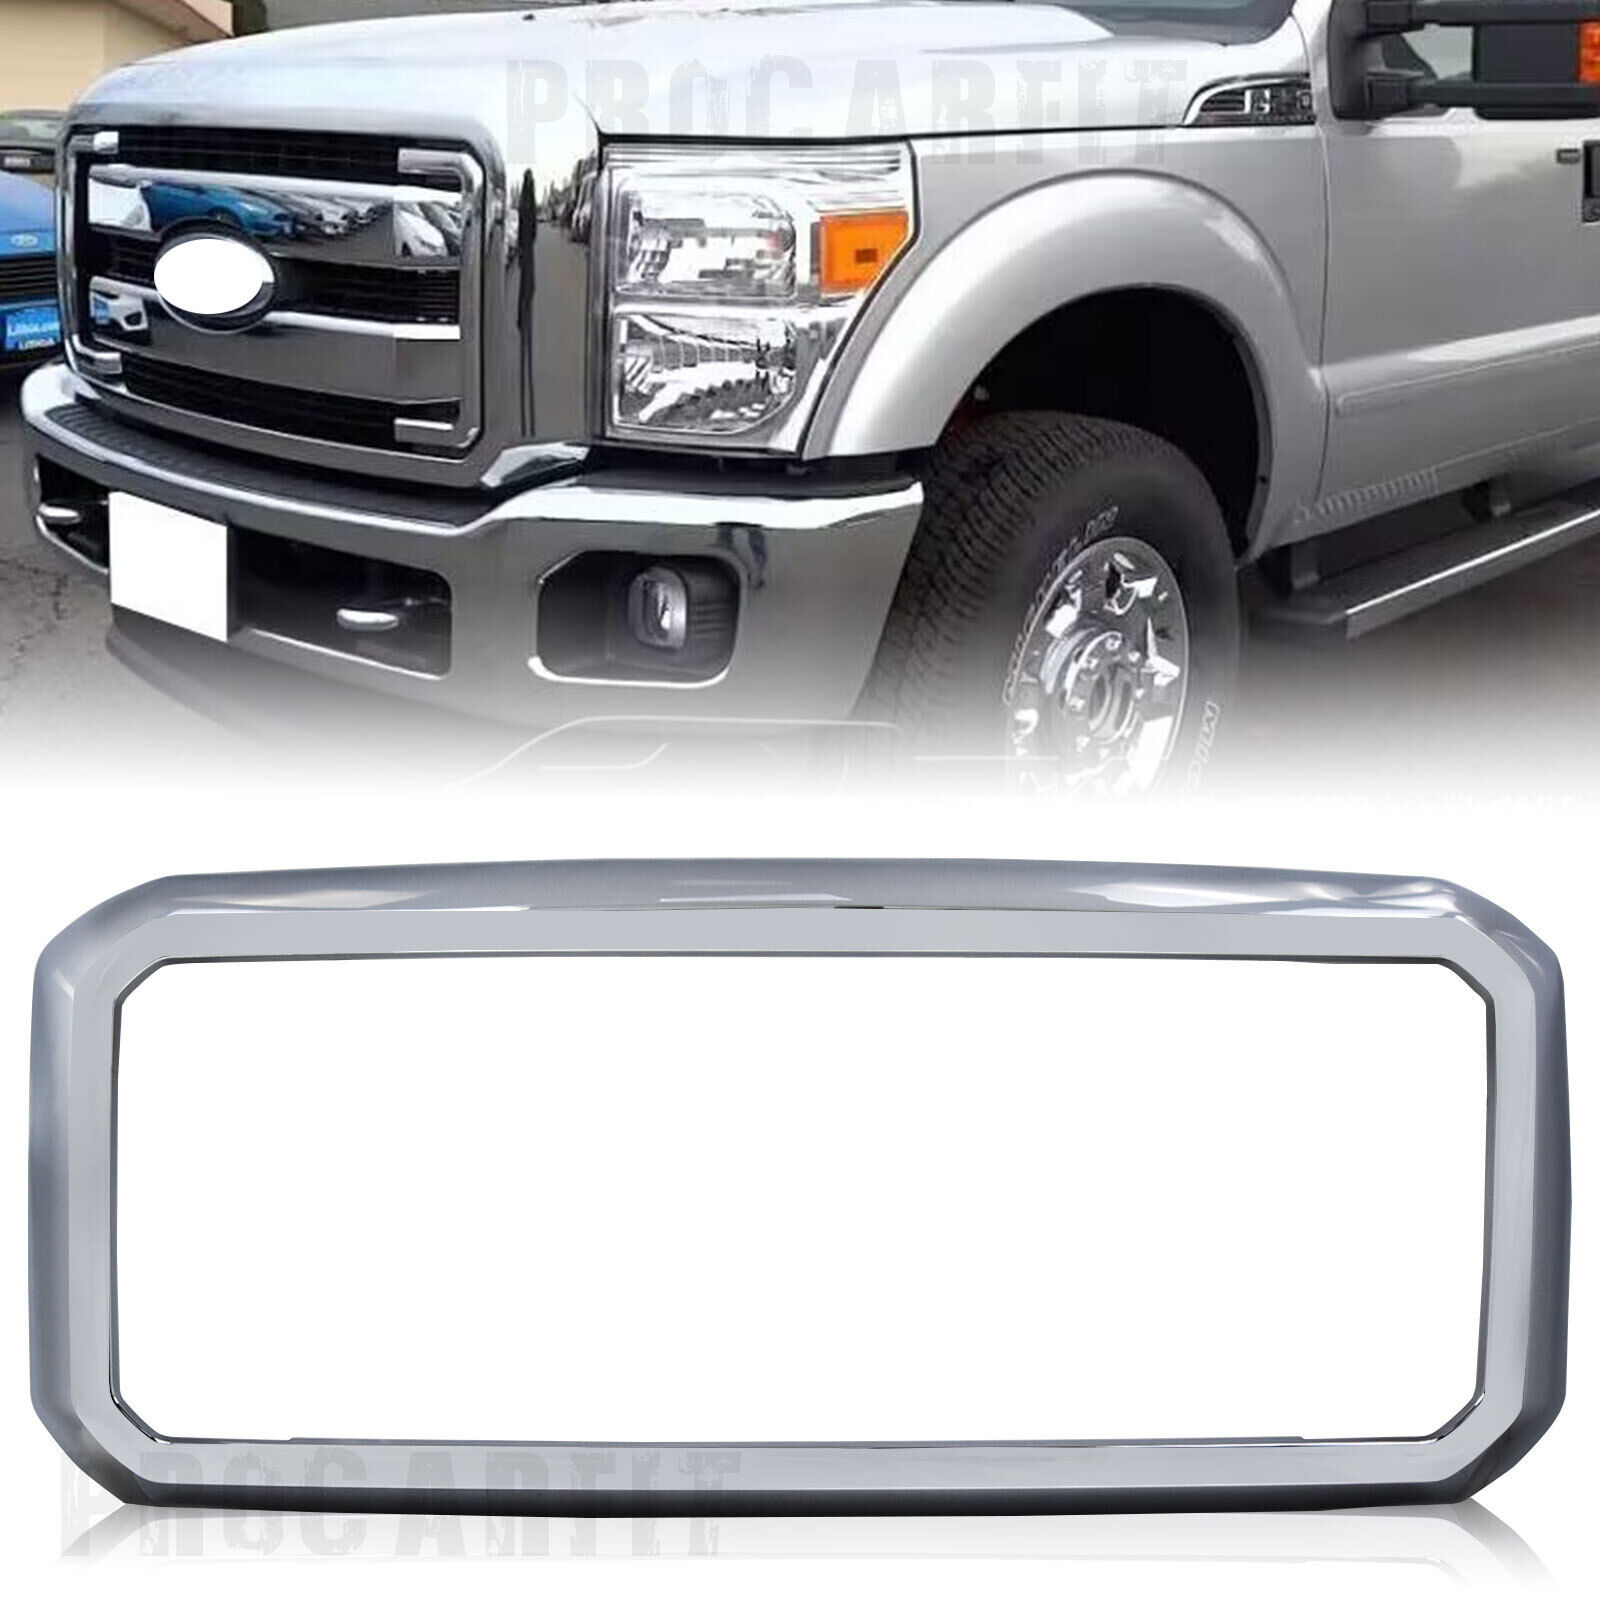 Grille Shell For 2011-2016 Ford F-250 Super Duty F-350 Super Duty Chrome Plastic